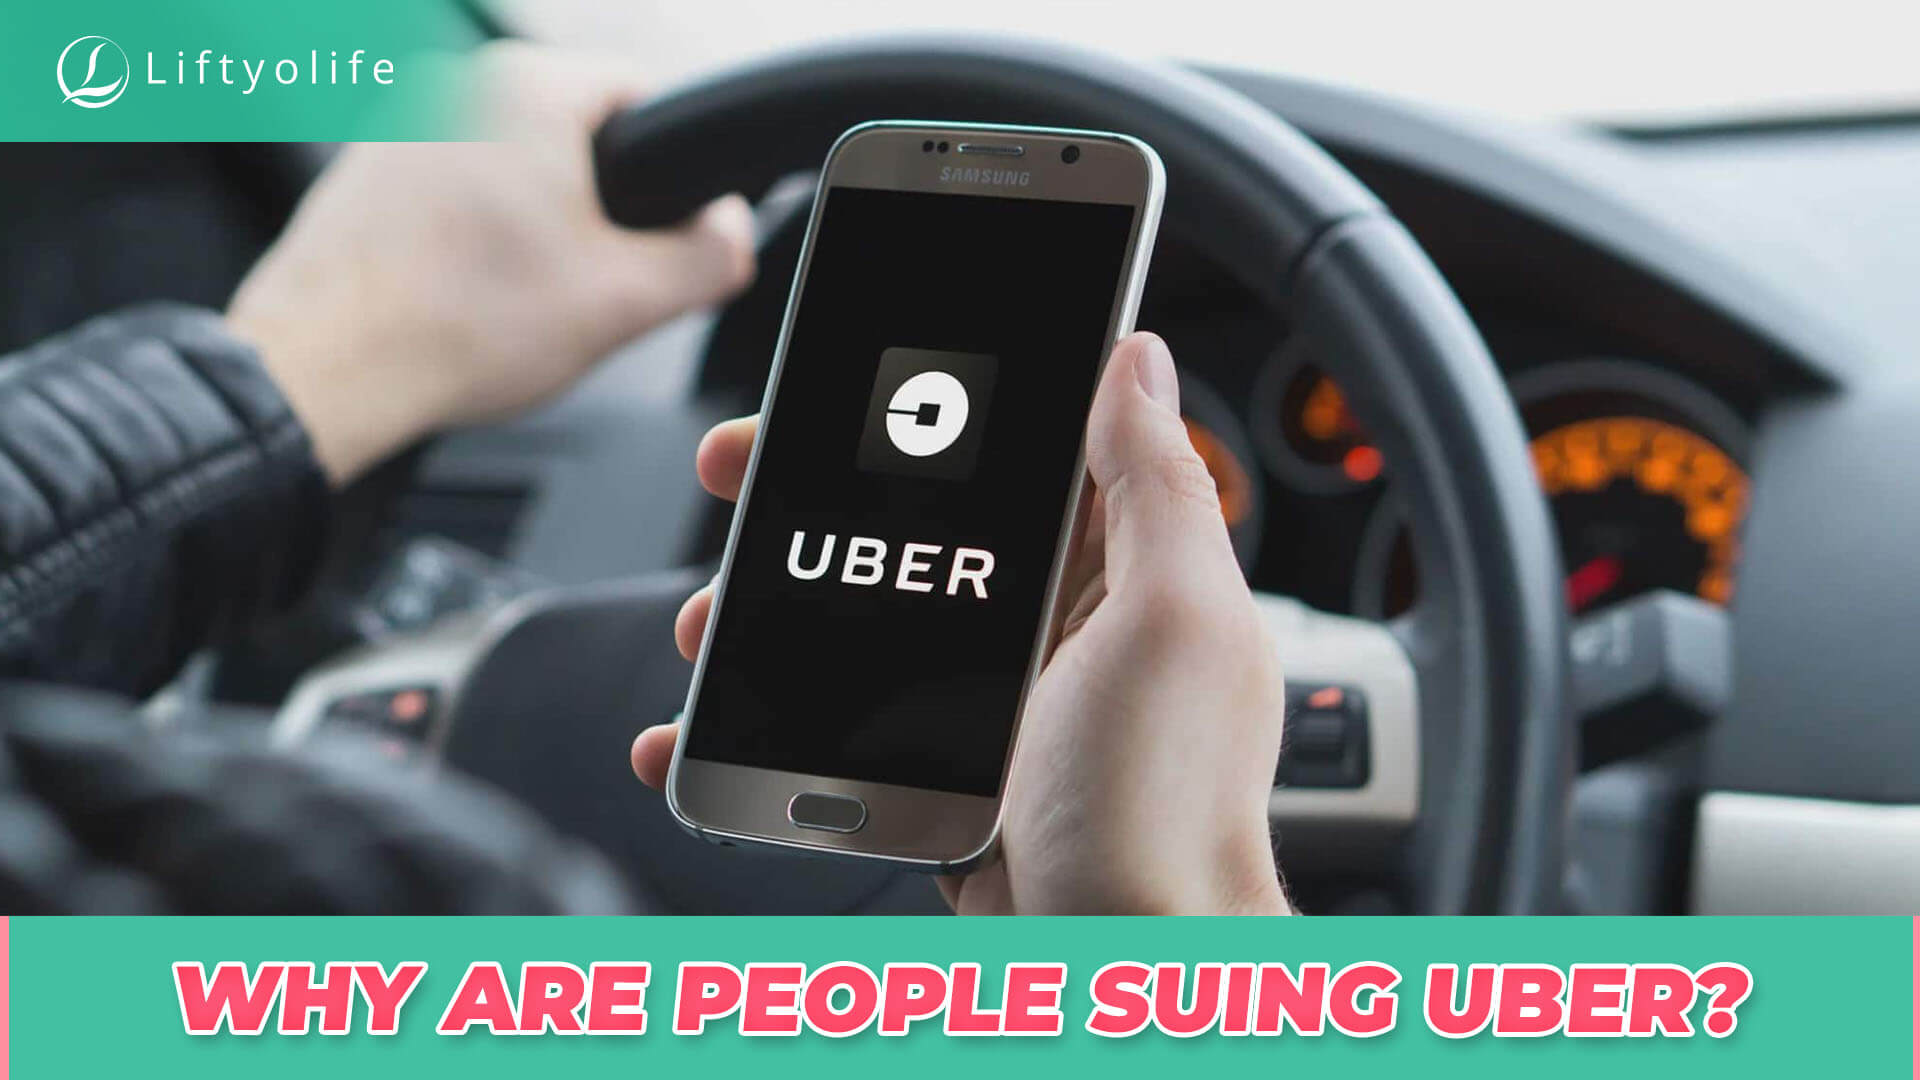 Why Are People Suing Uber?